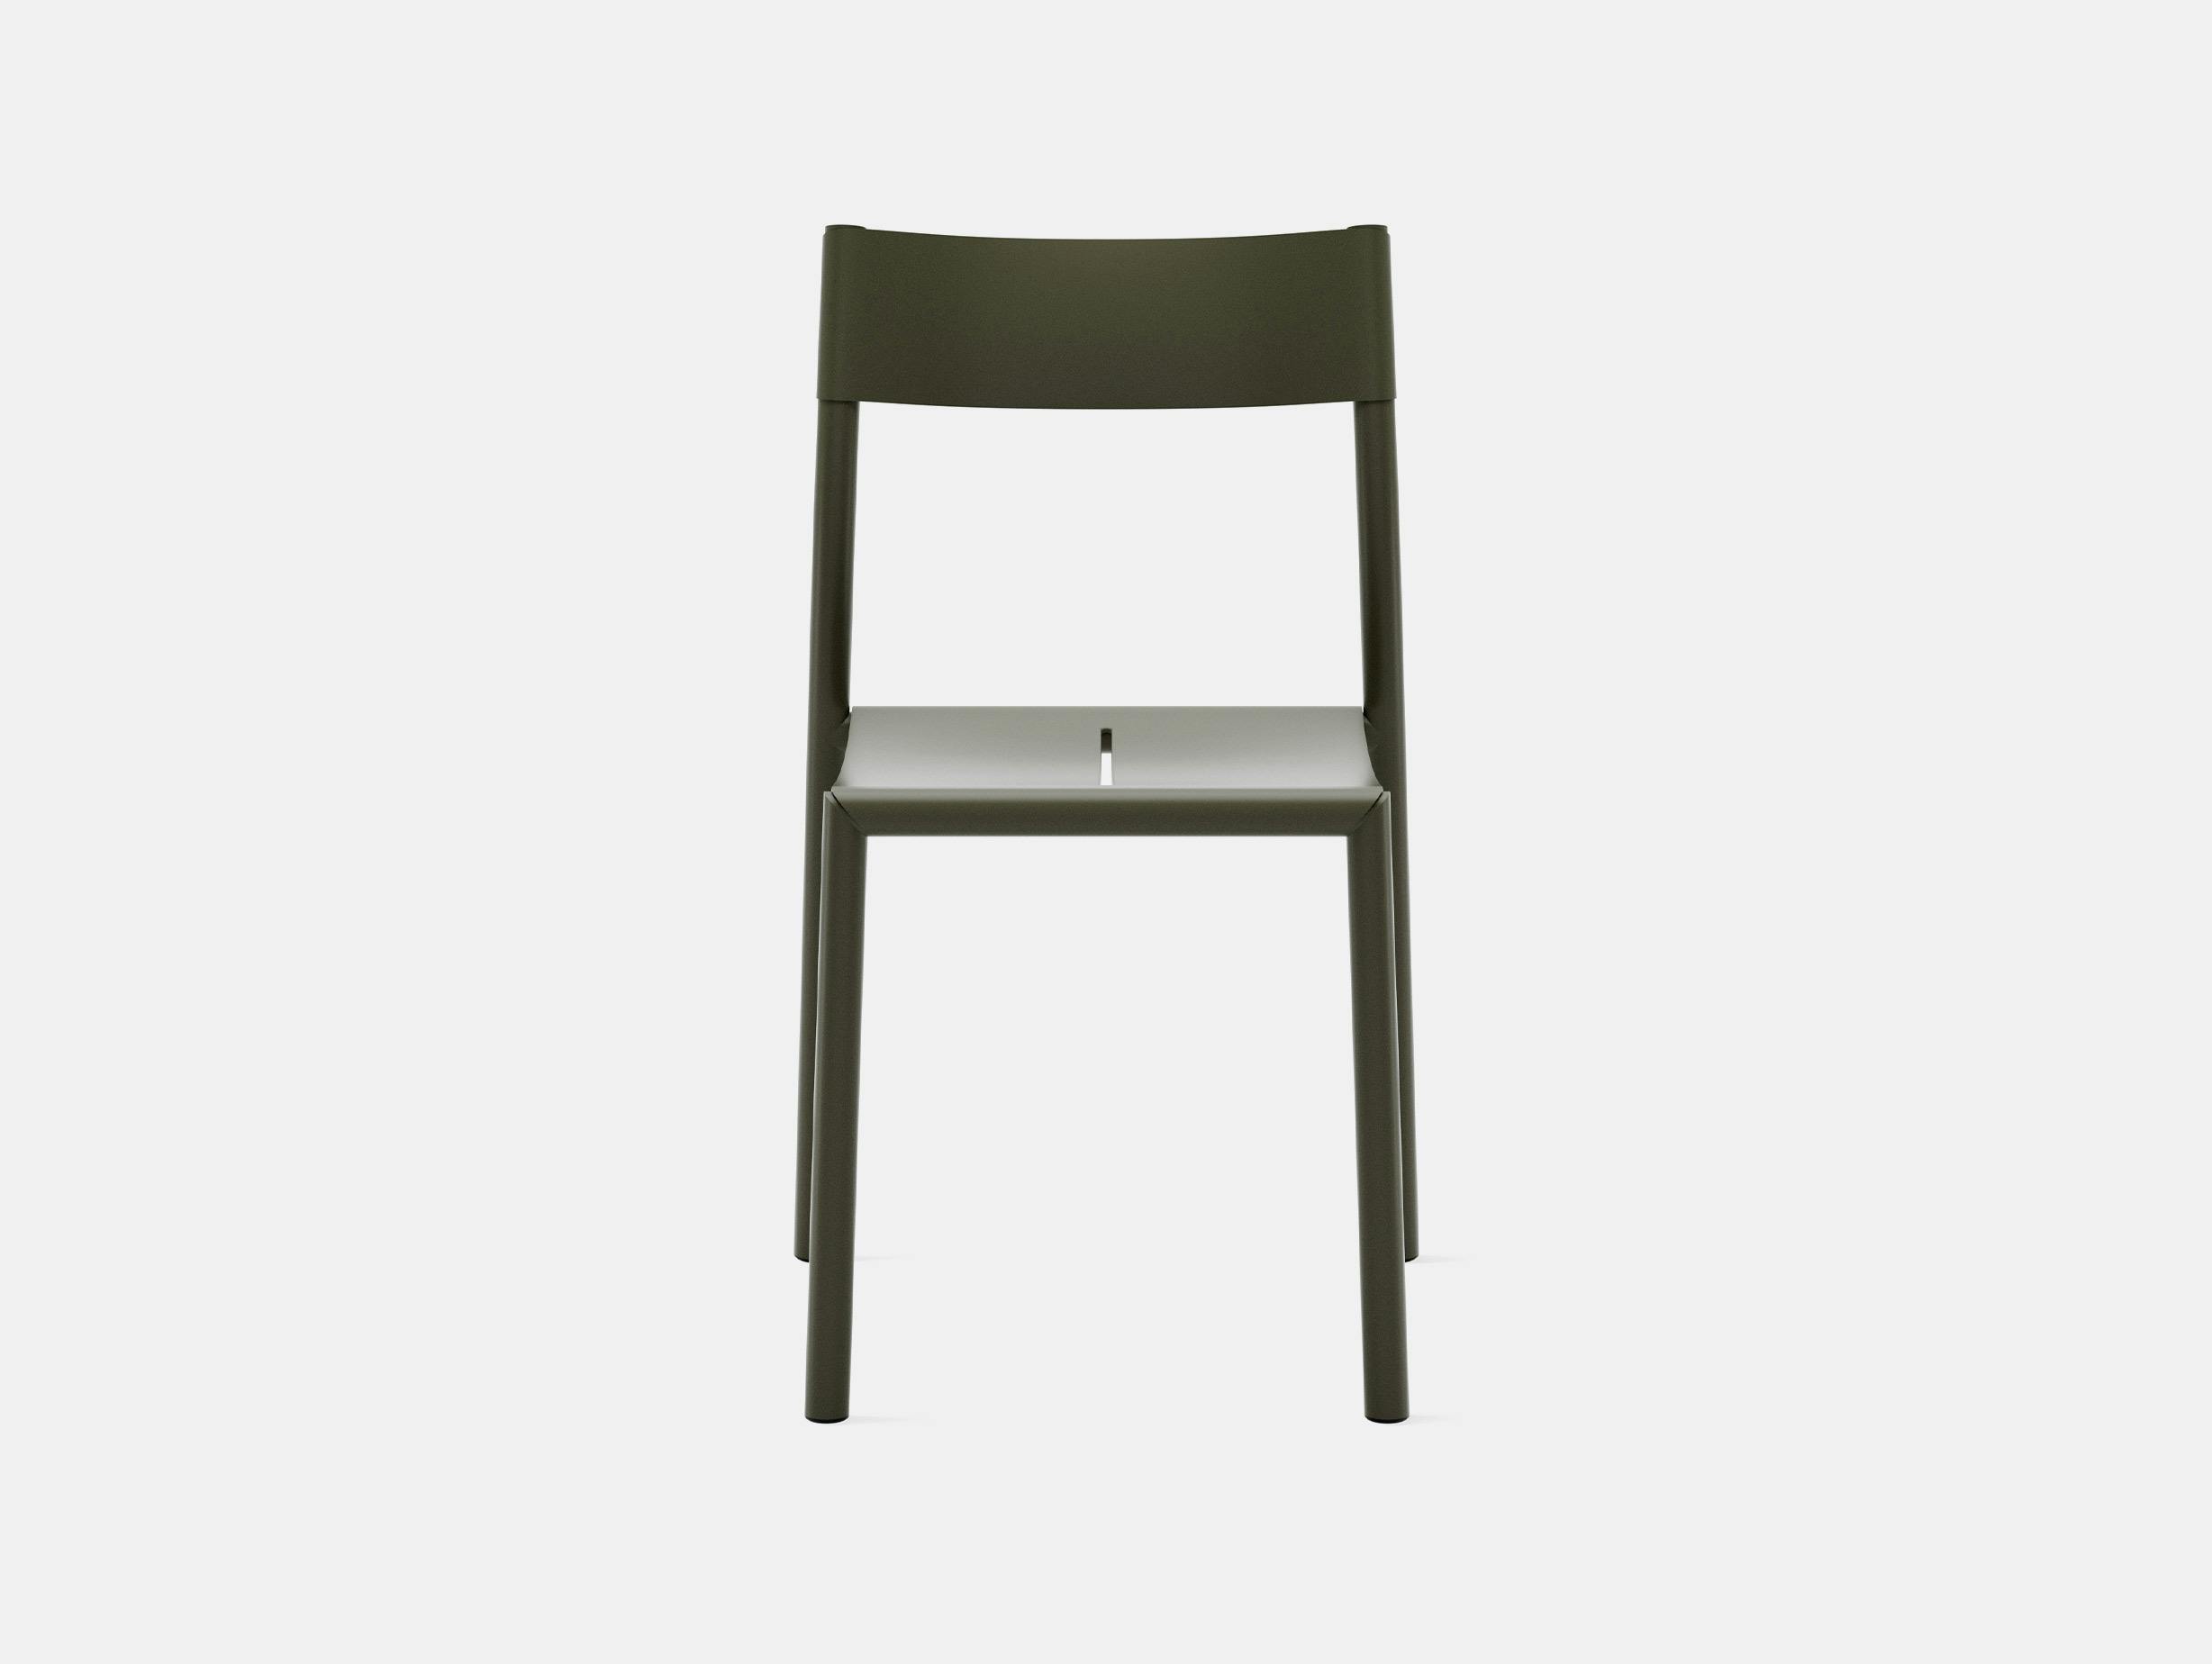 New works hannes fritz may chair dark green2